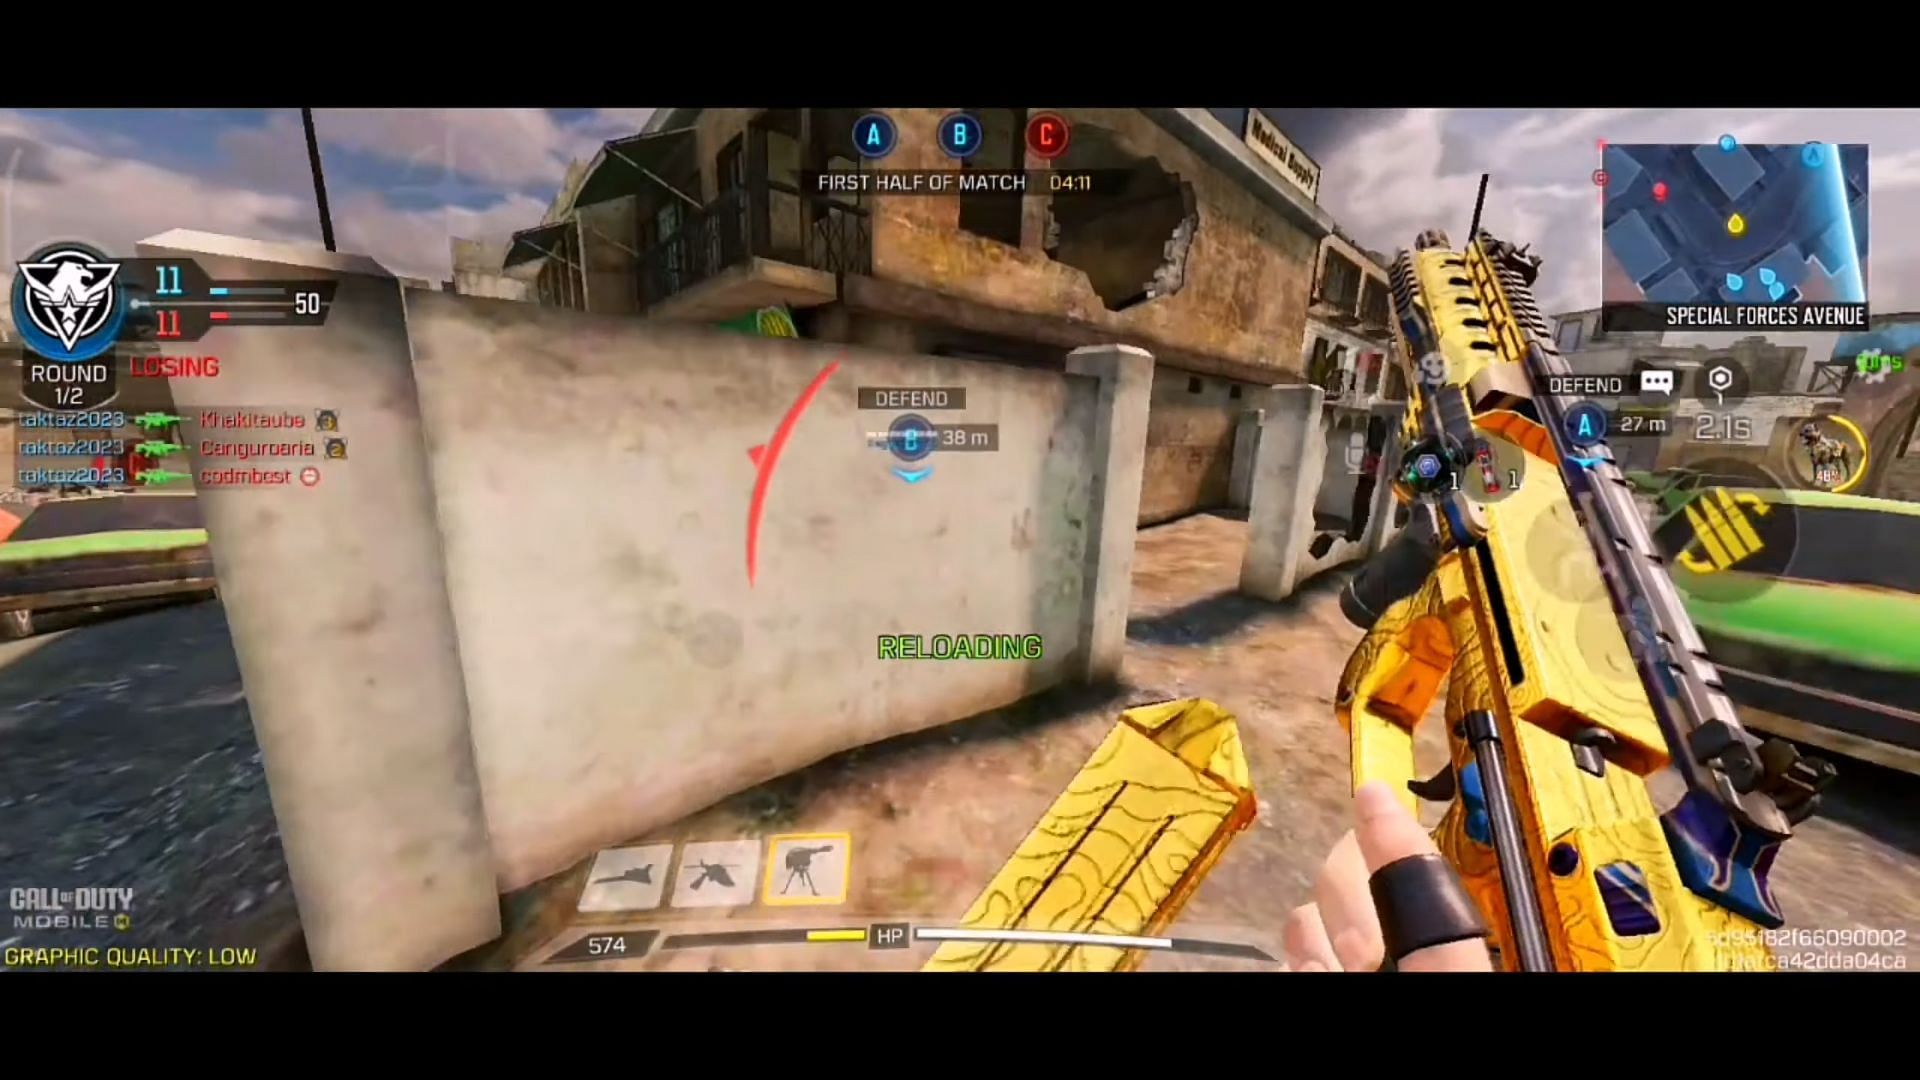 PDW gameplay in COD Mobile (Image via Gamerbaba82 YT)